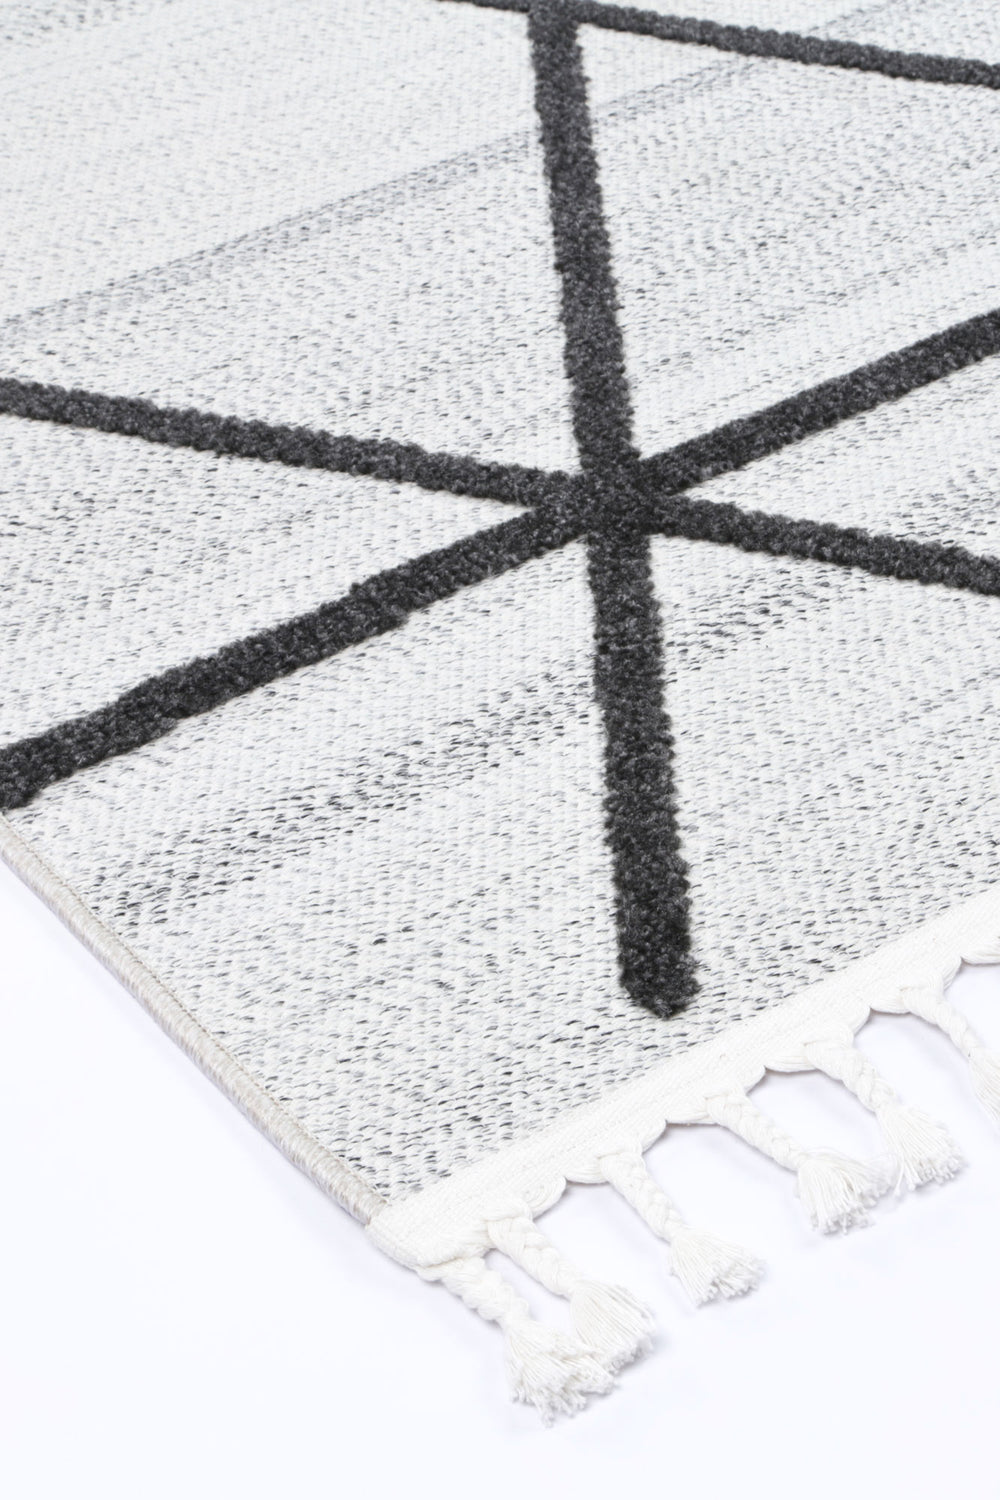 Ares Trojan Geometric Ivory and Anthracite Rug